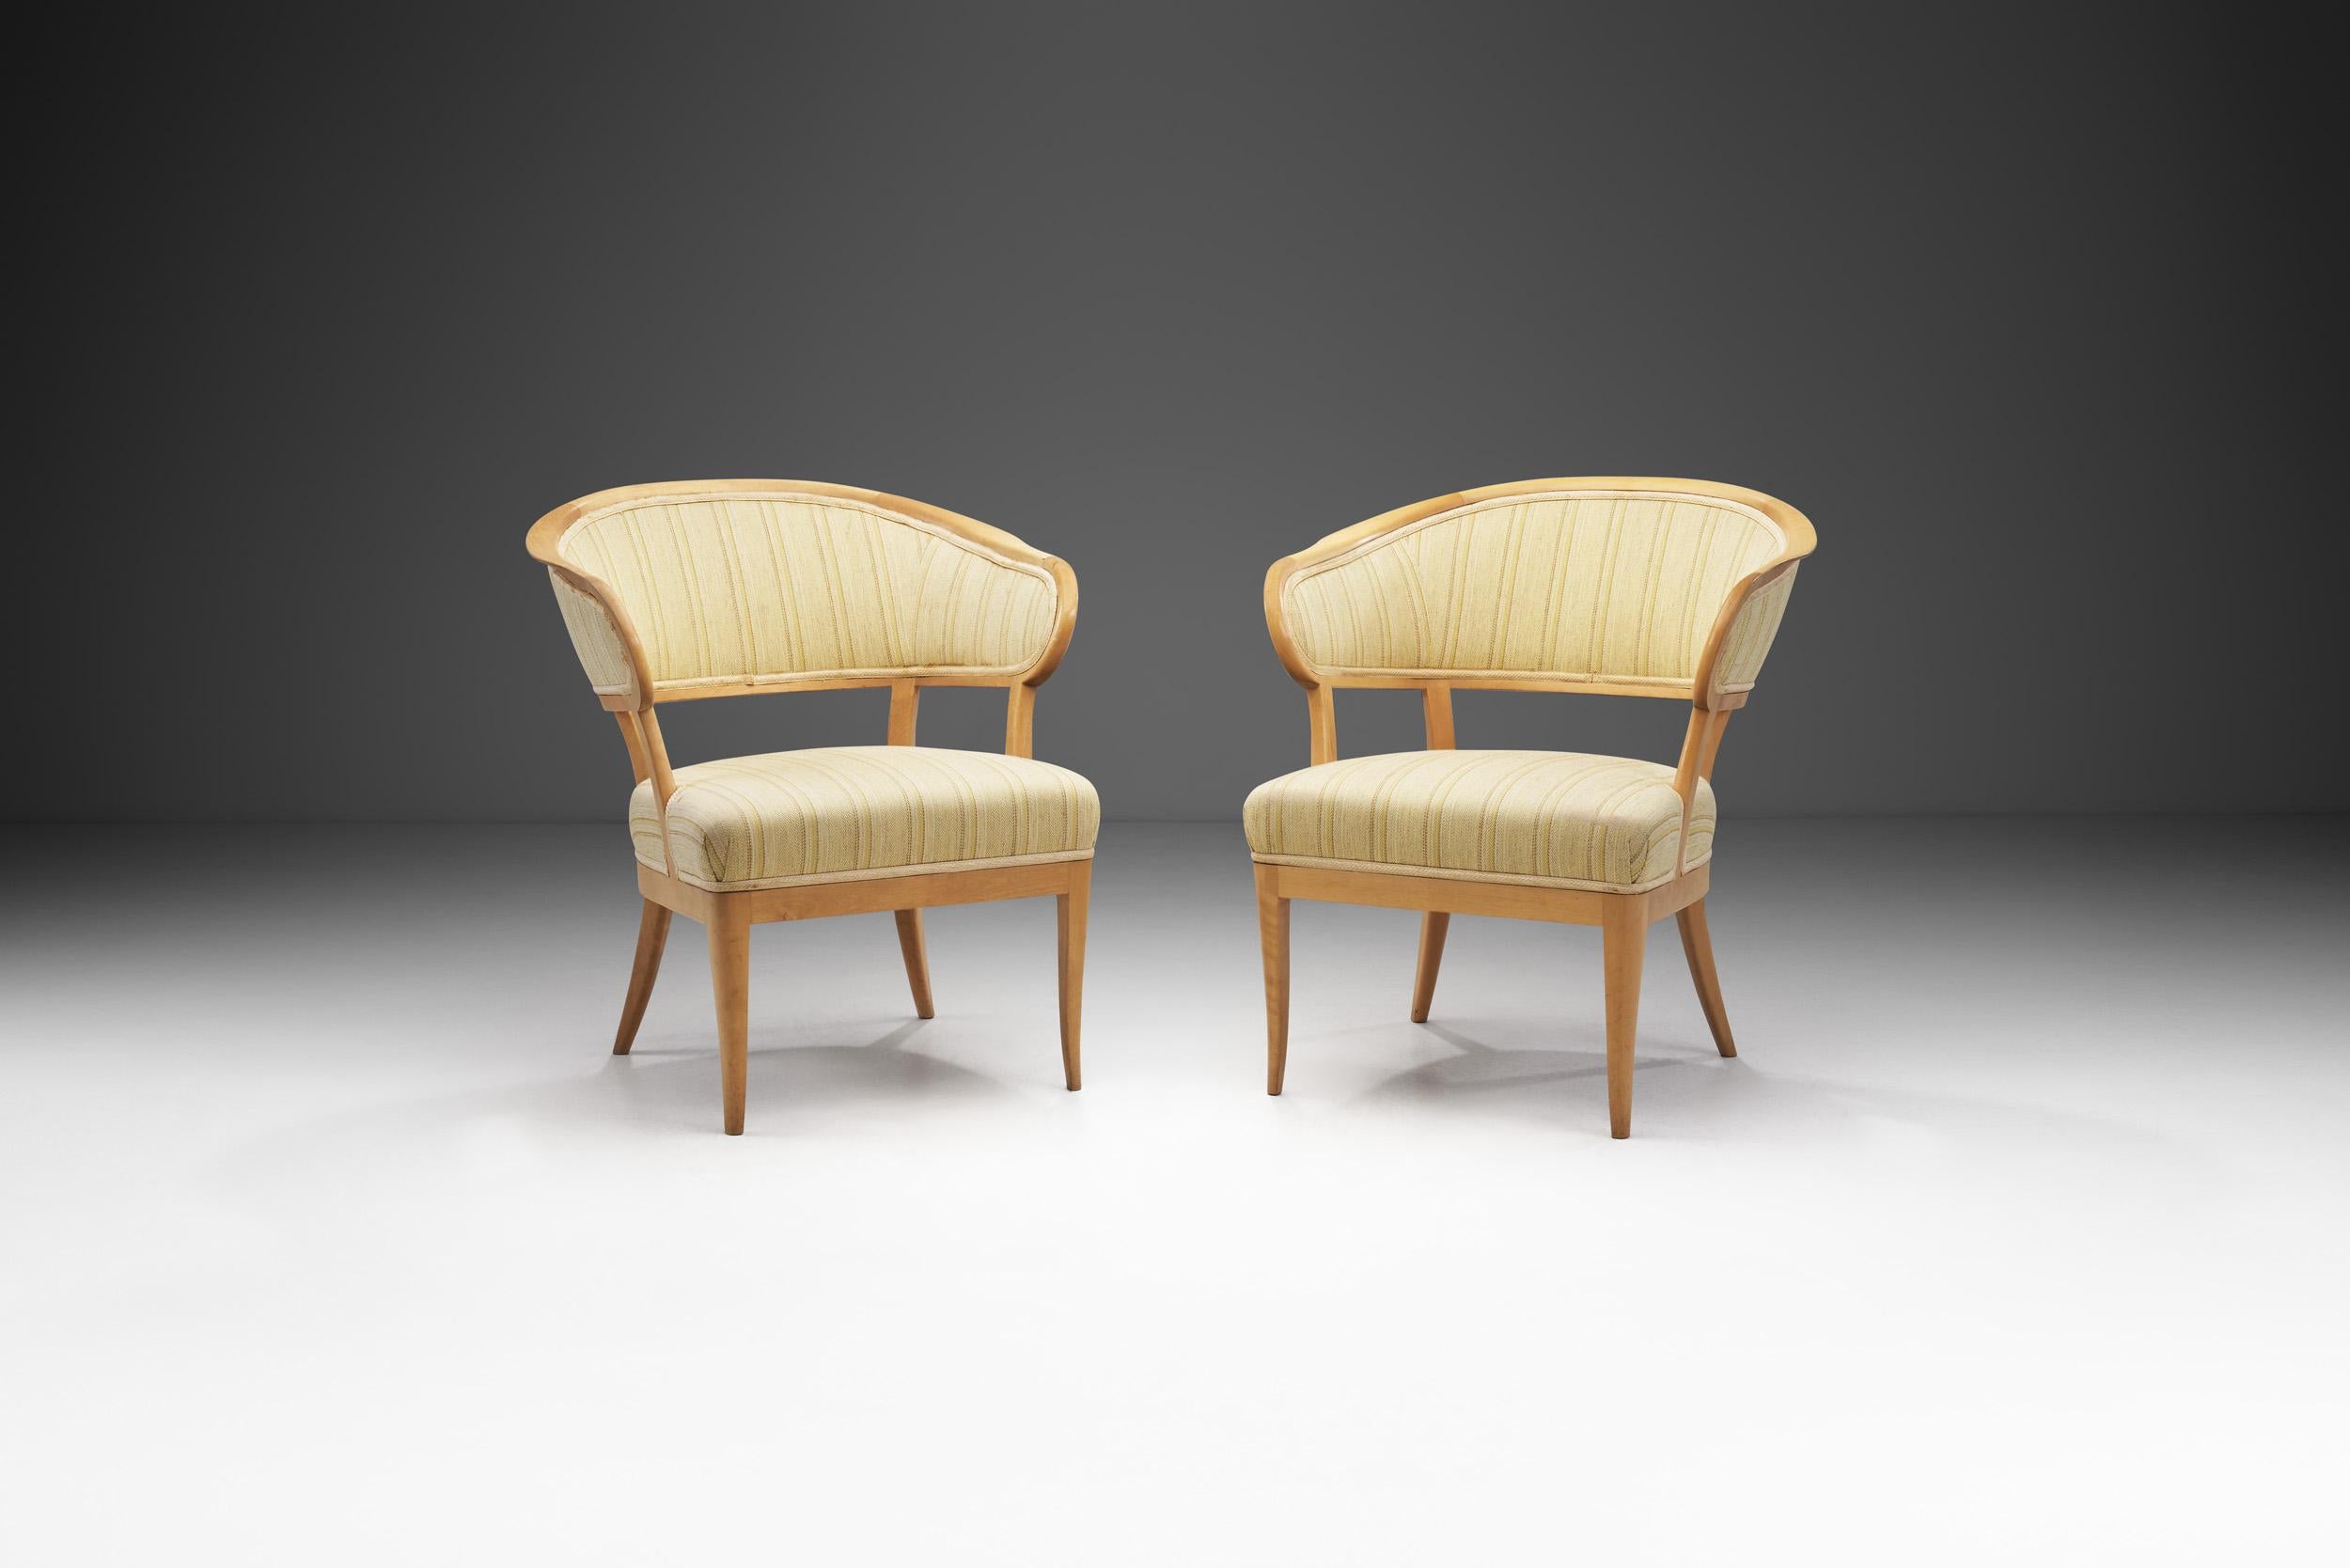 “Jonas Love” is an iconic model that was the inspiration behind Malmsten’s several “count” chairs. With a klismos-style curved back, this pair of armchairs is the result of the work of the joinery workshop suited to artisanal production that